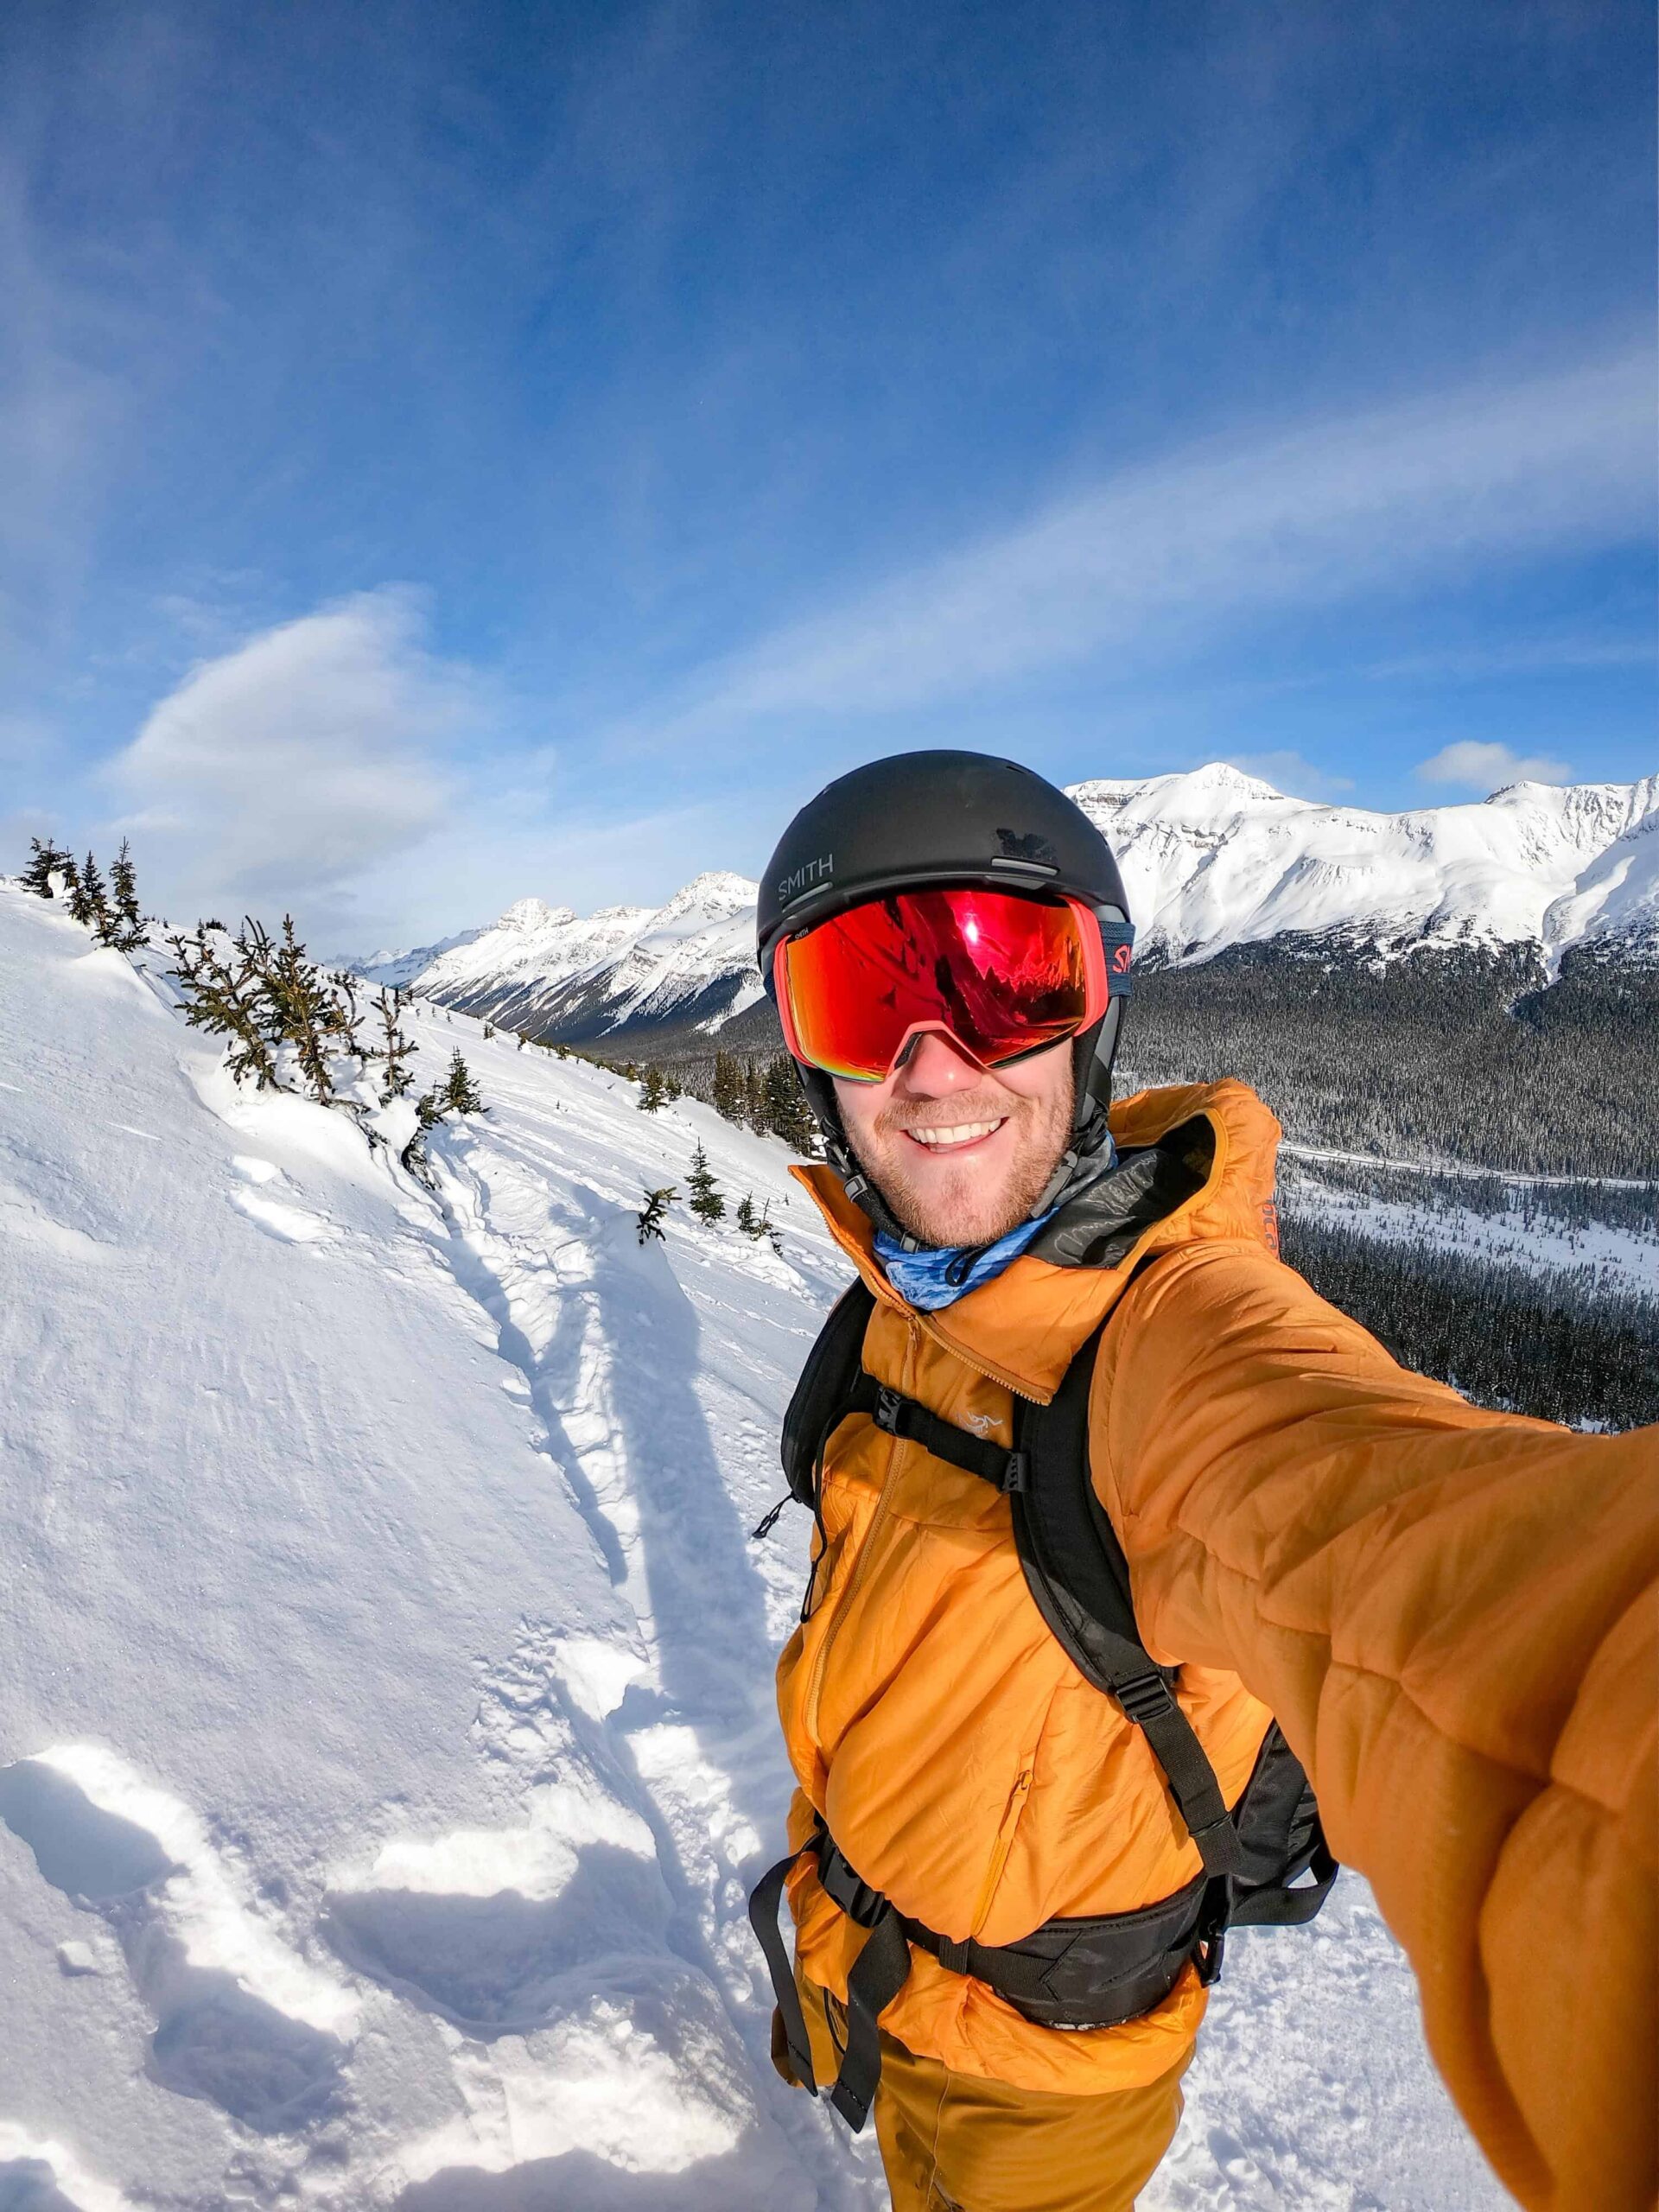 Selfie While Ski Touring On Bow Summit in the Winter